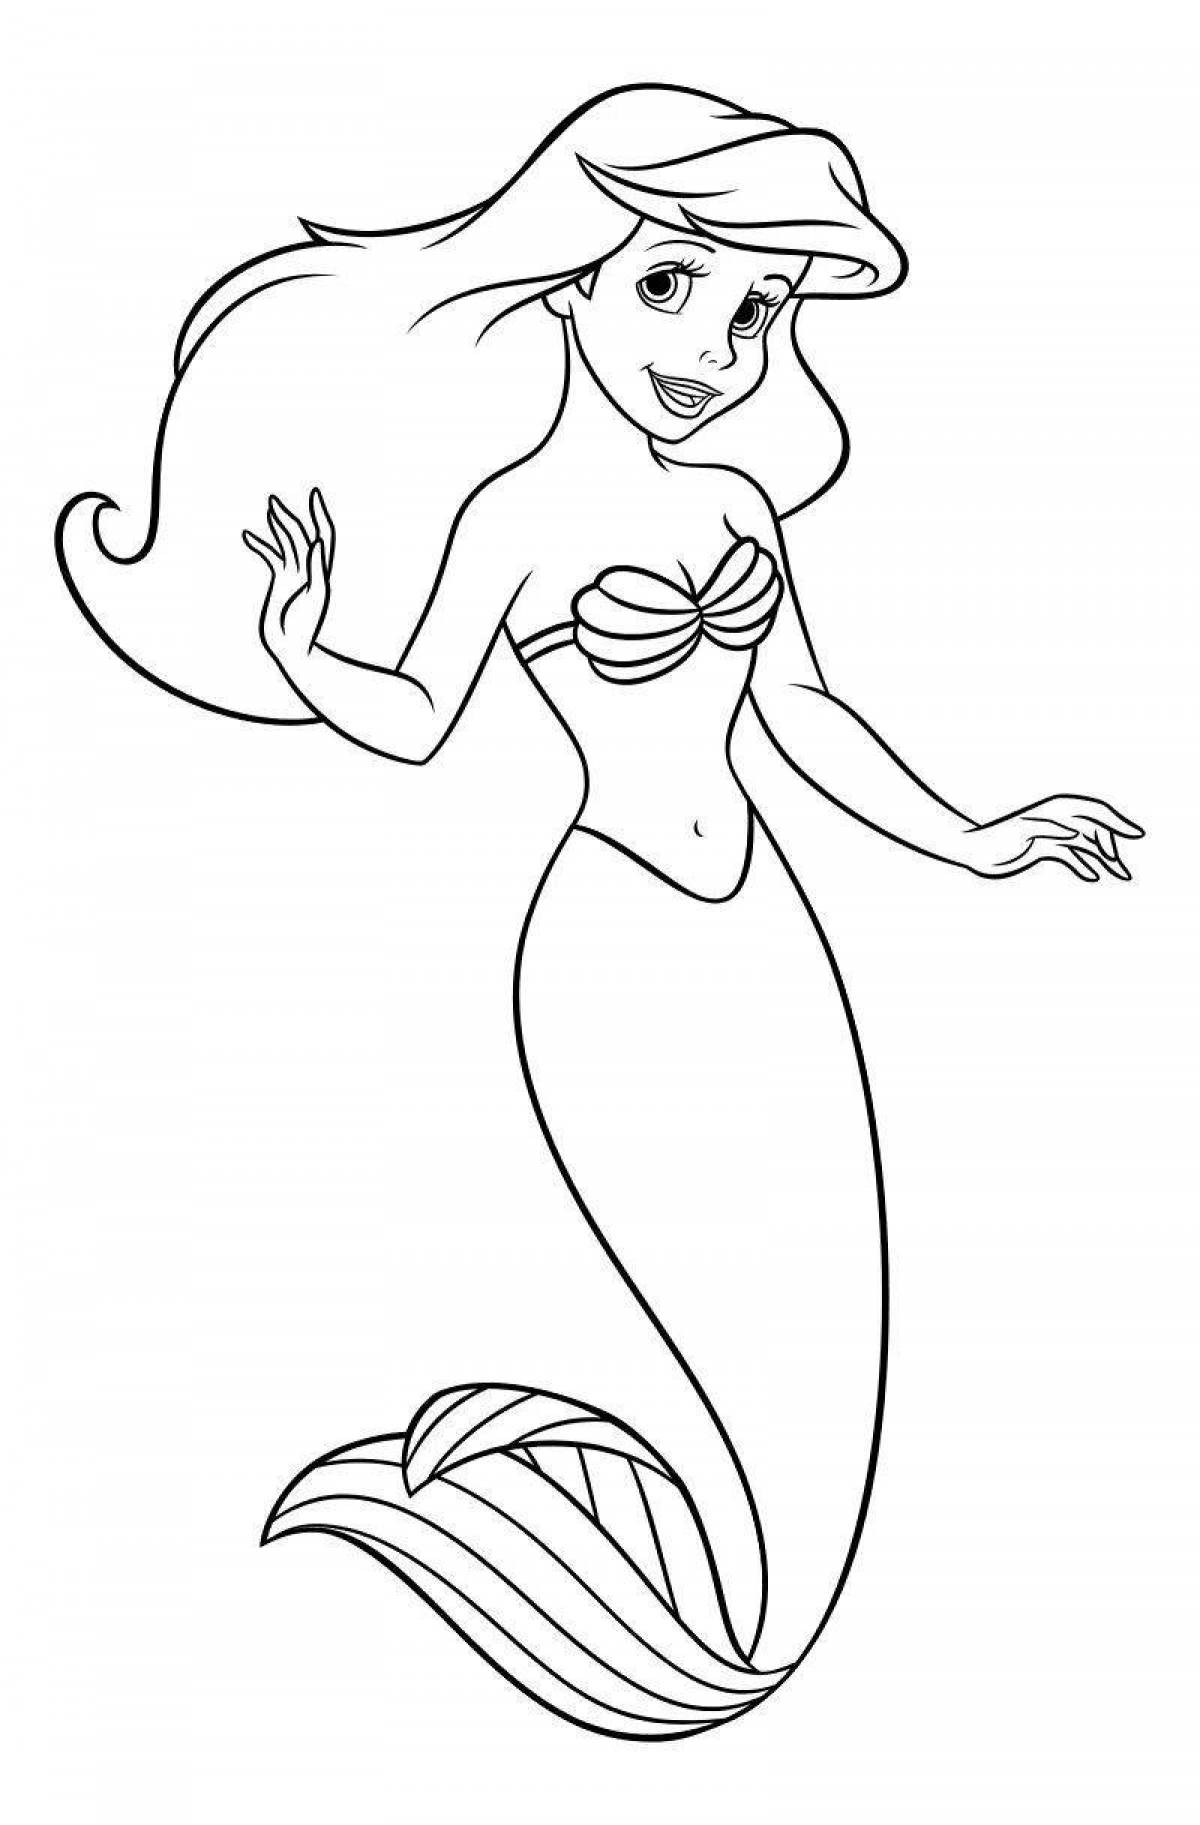 Live coloring for girls ariel